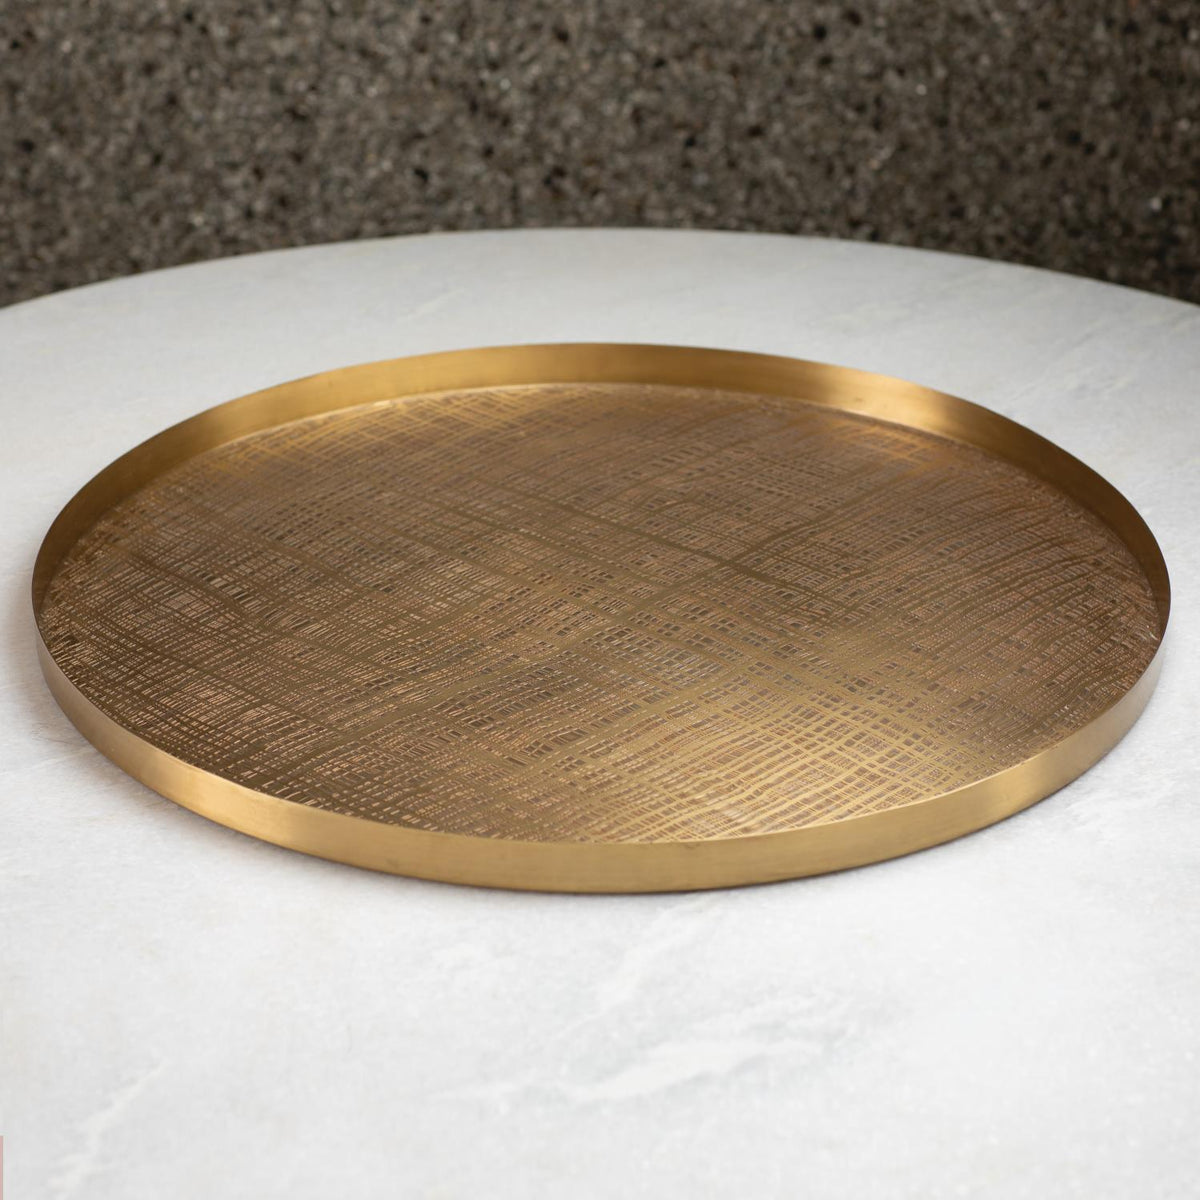 Plaid Etched Tray-Antique Brass-Global Views-Trays-Artistic Elements